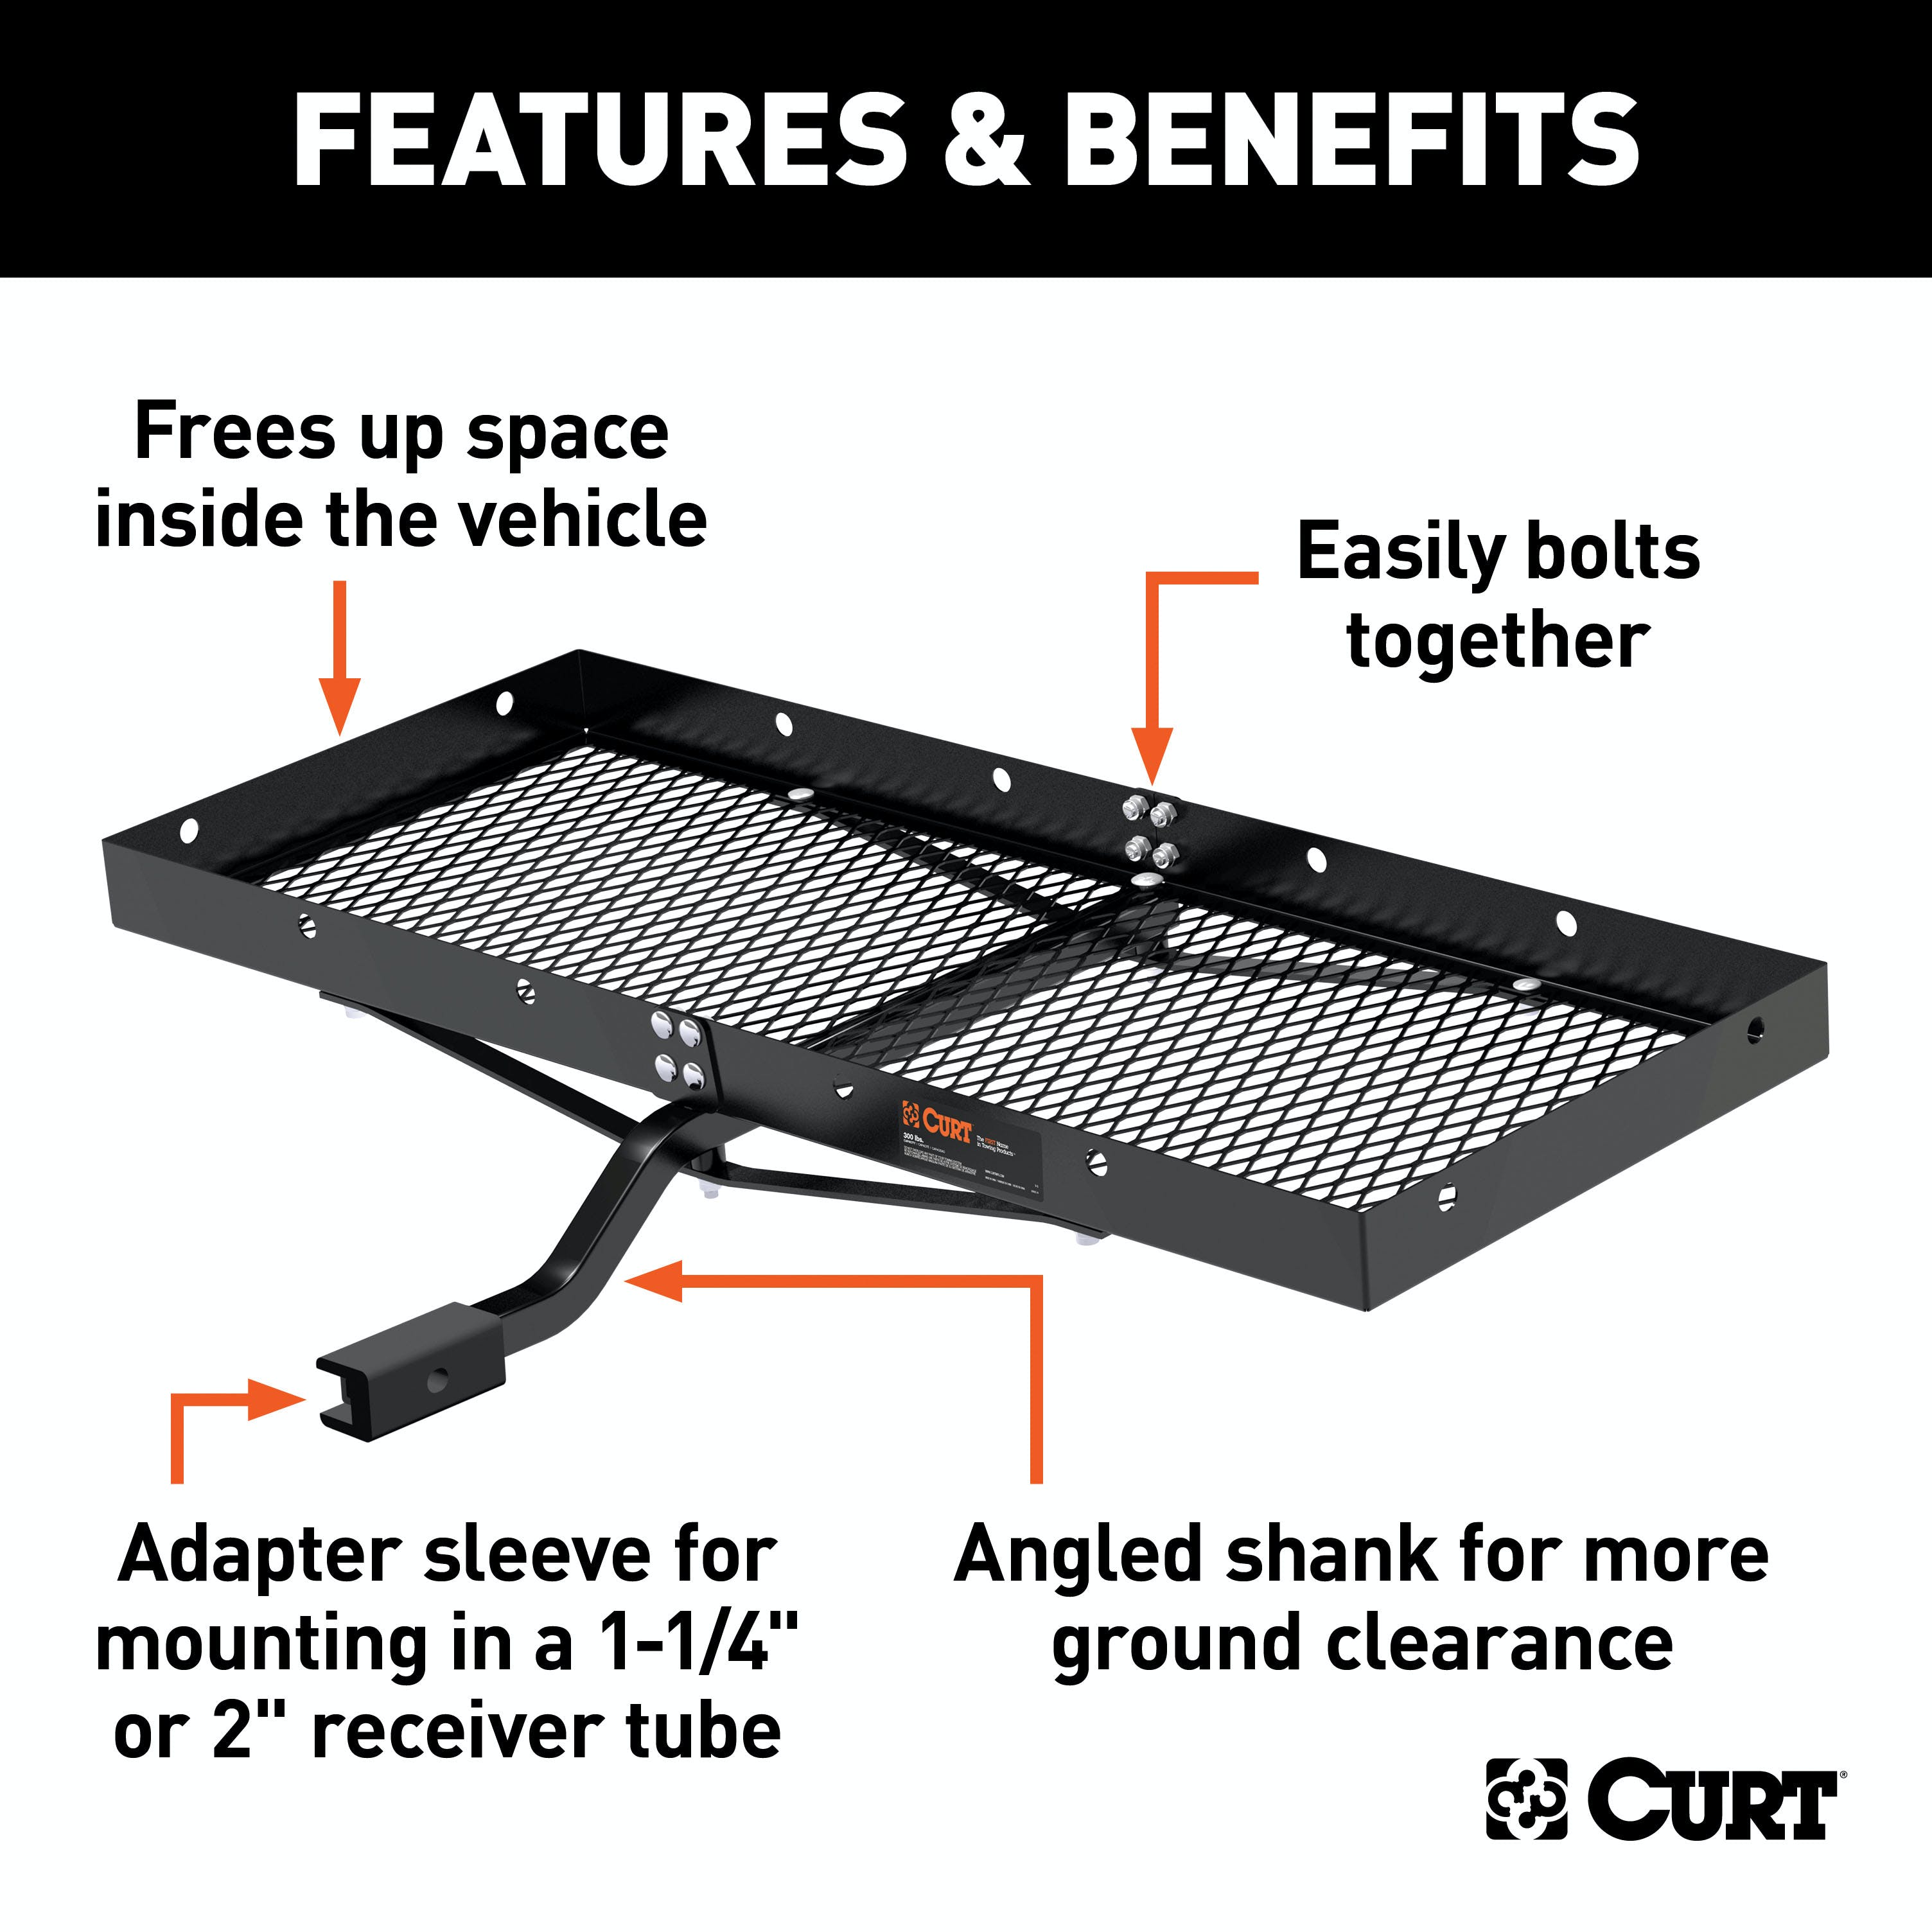 CURT 18110 48 x 20 Black Steel Tray Cargo Carrier (1-1/4, 2 Adapter, 300 lbs.)